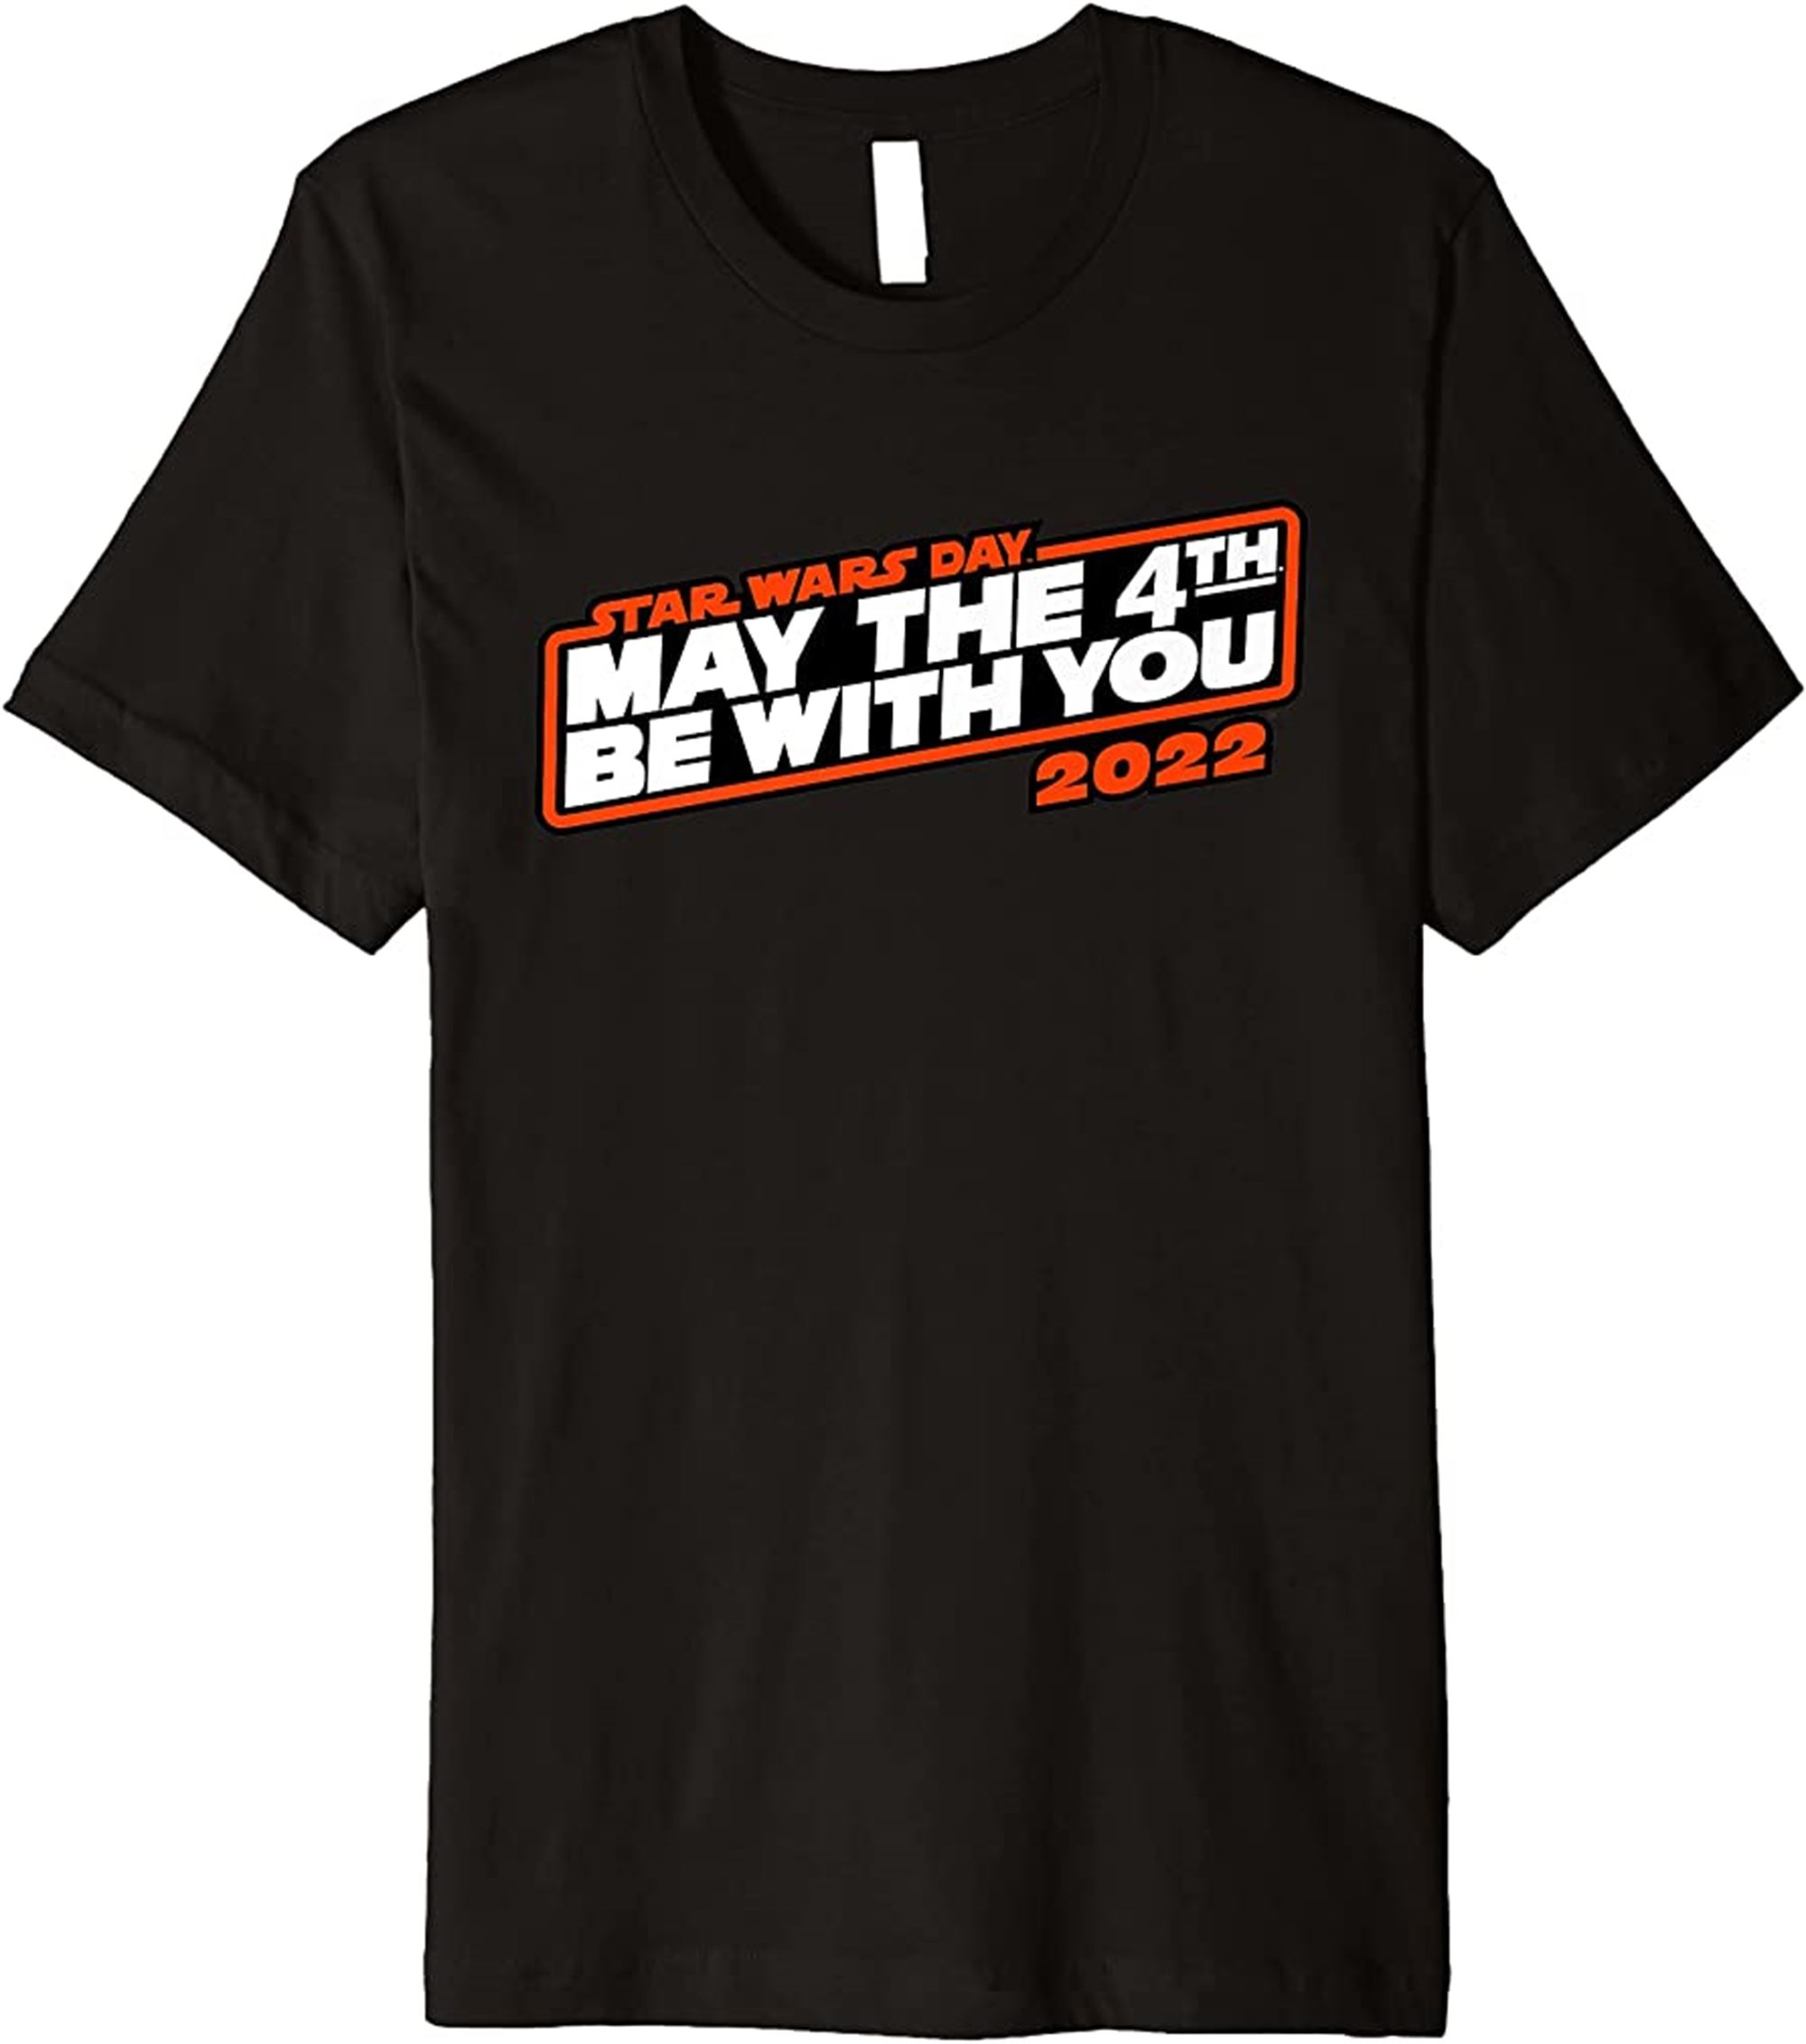 May The 4th Be With You 2022 Premium T-shirt Full Size Up To 5xl